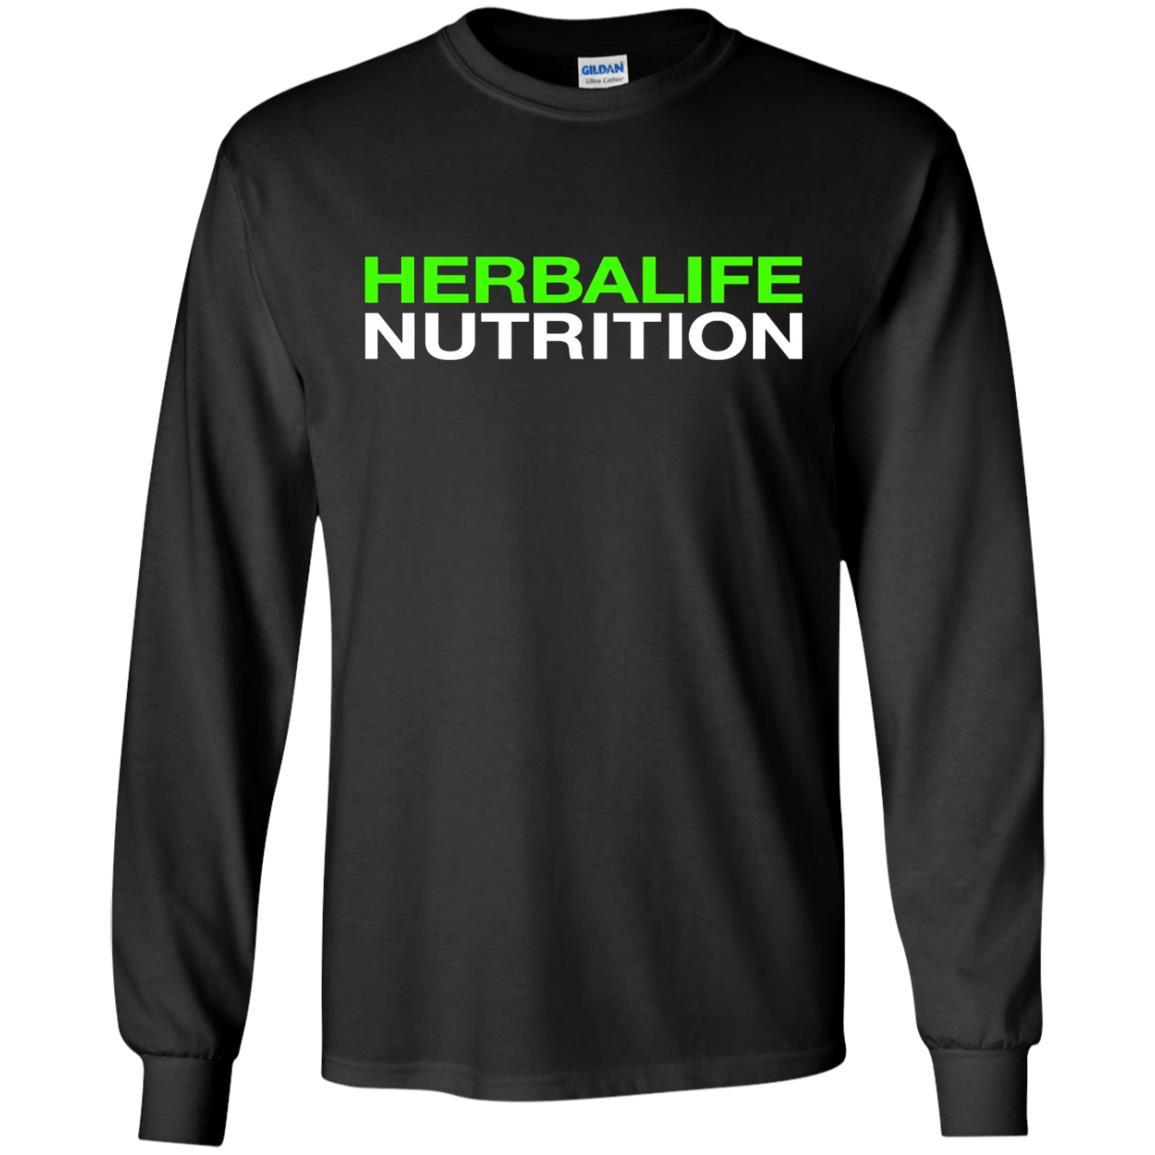 HERBALIFE NUTRITION - LS T-Shirt Style / Color / Size